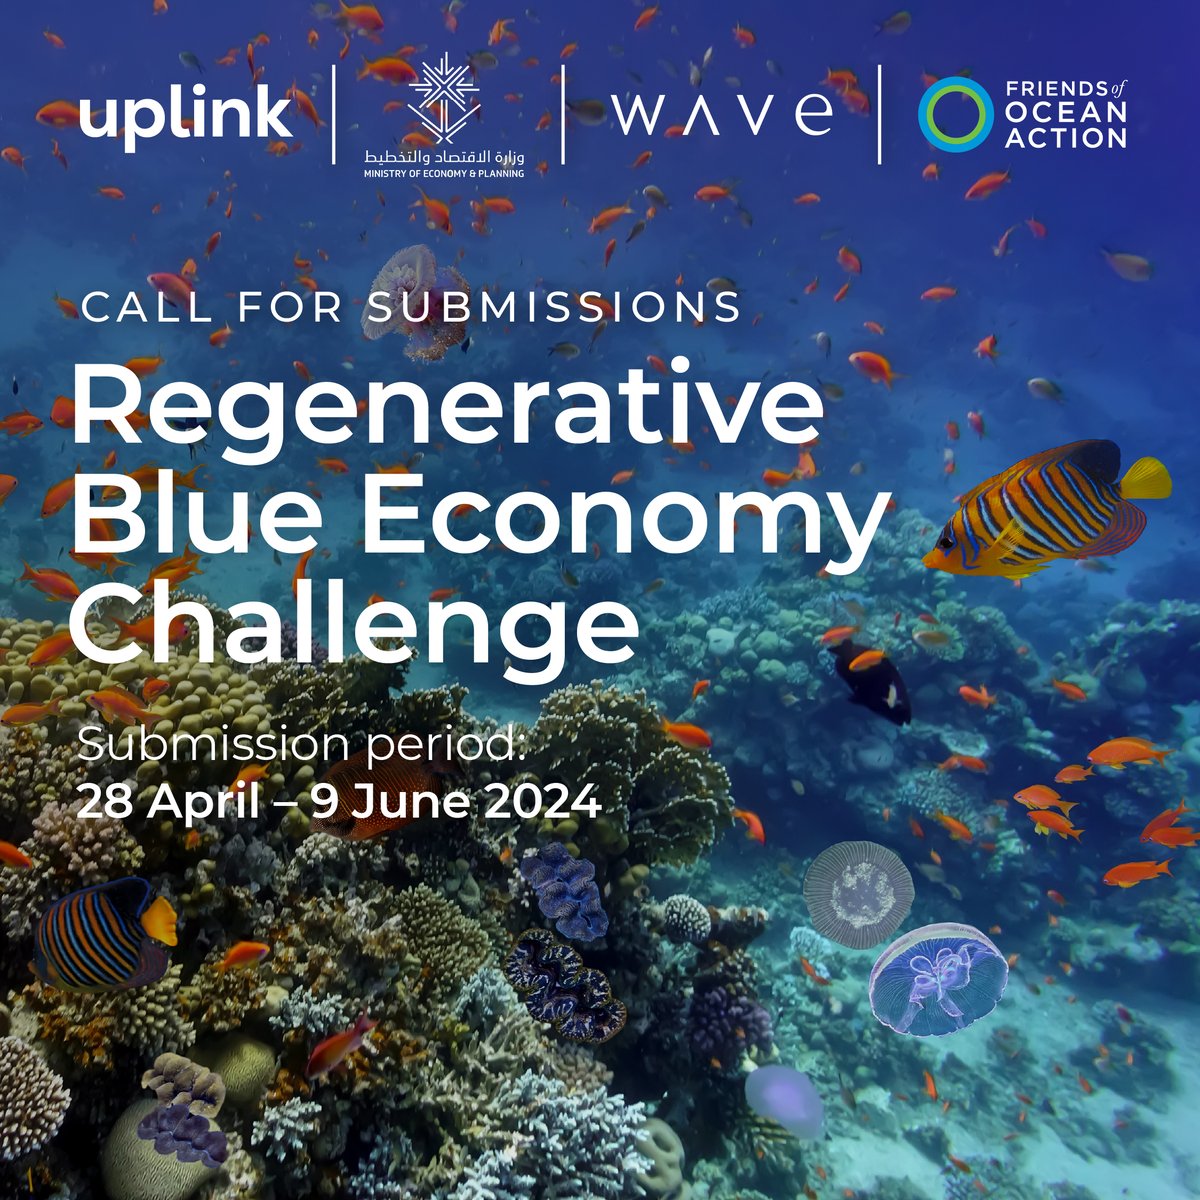 🌊 The Regenerative Blue Economy Challenge is open for submissions!

We are seeking innovative solutions to restore marine and coastal ecosystems, combat pollution, and promote sustainable economic growth.

🐡 Submit your solution by 09 June: ow.ly/XkNp50Rqort